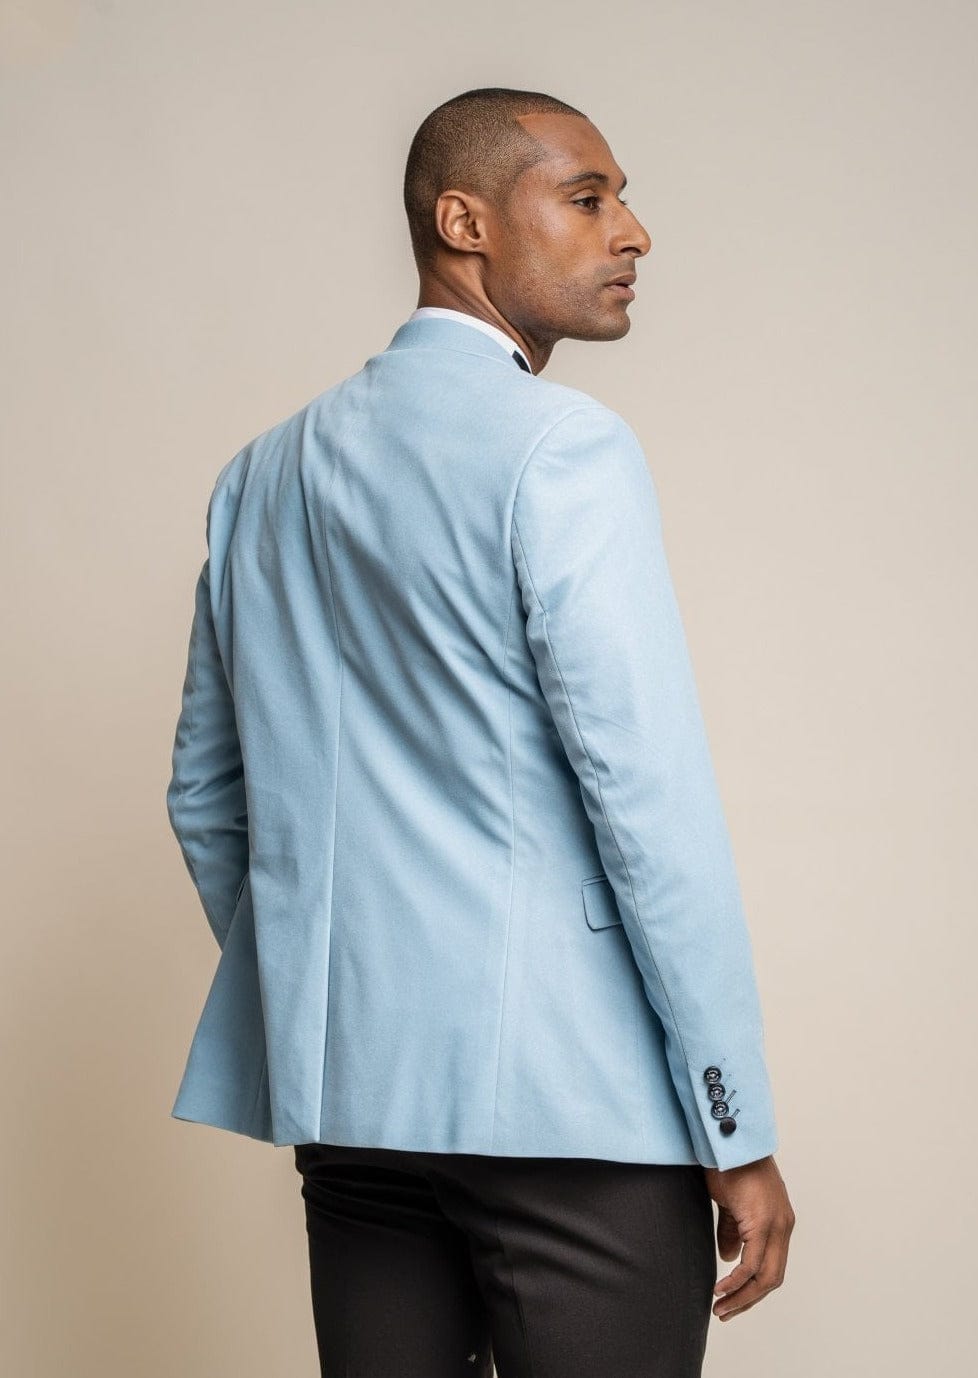 Discover more than 161 powder blue suit mens latest